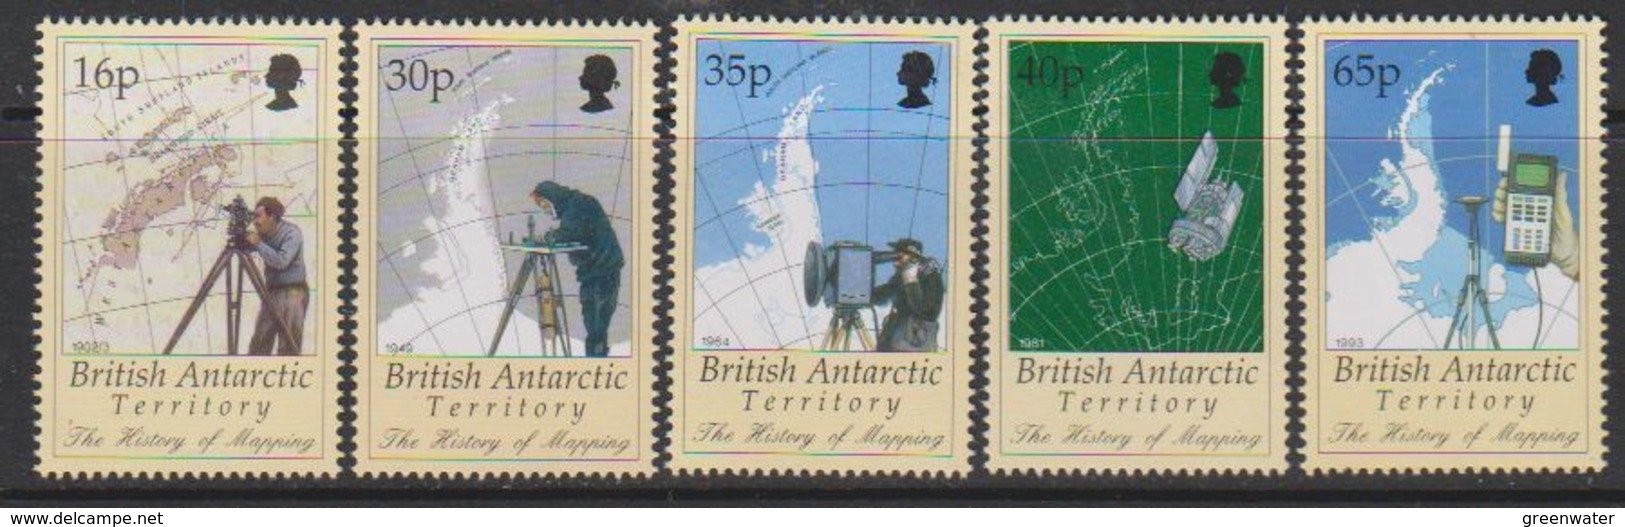 British Antarctic Territory (BAT) 1998 History Of Mapping 5v ** Mnh (59510) - Unused Stamps